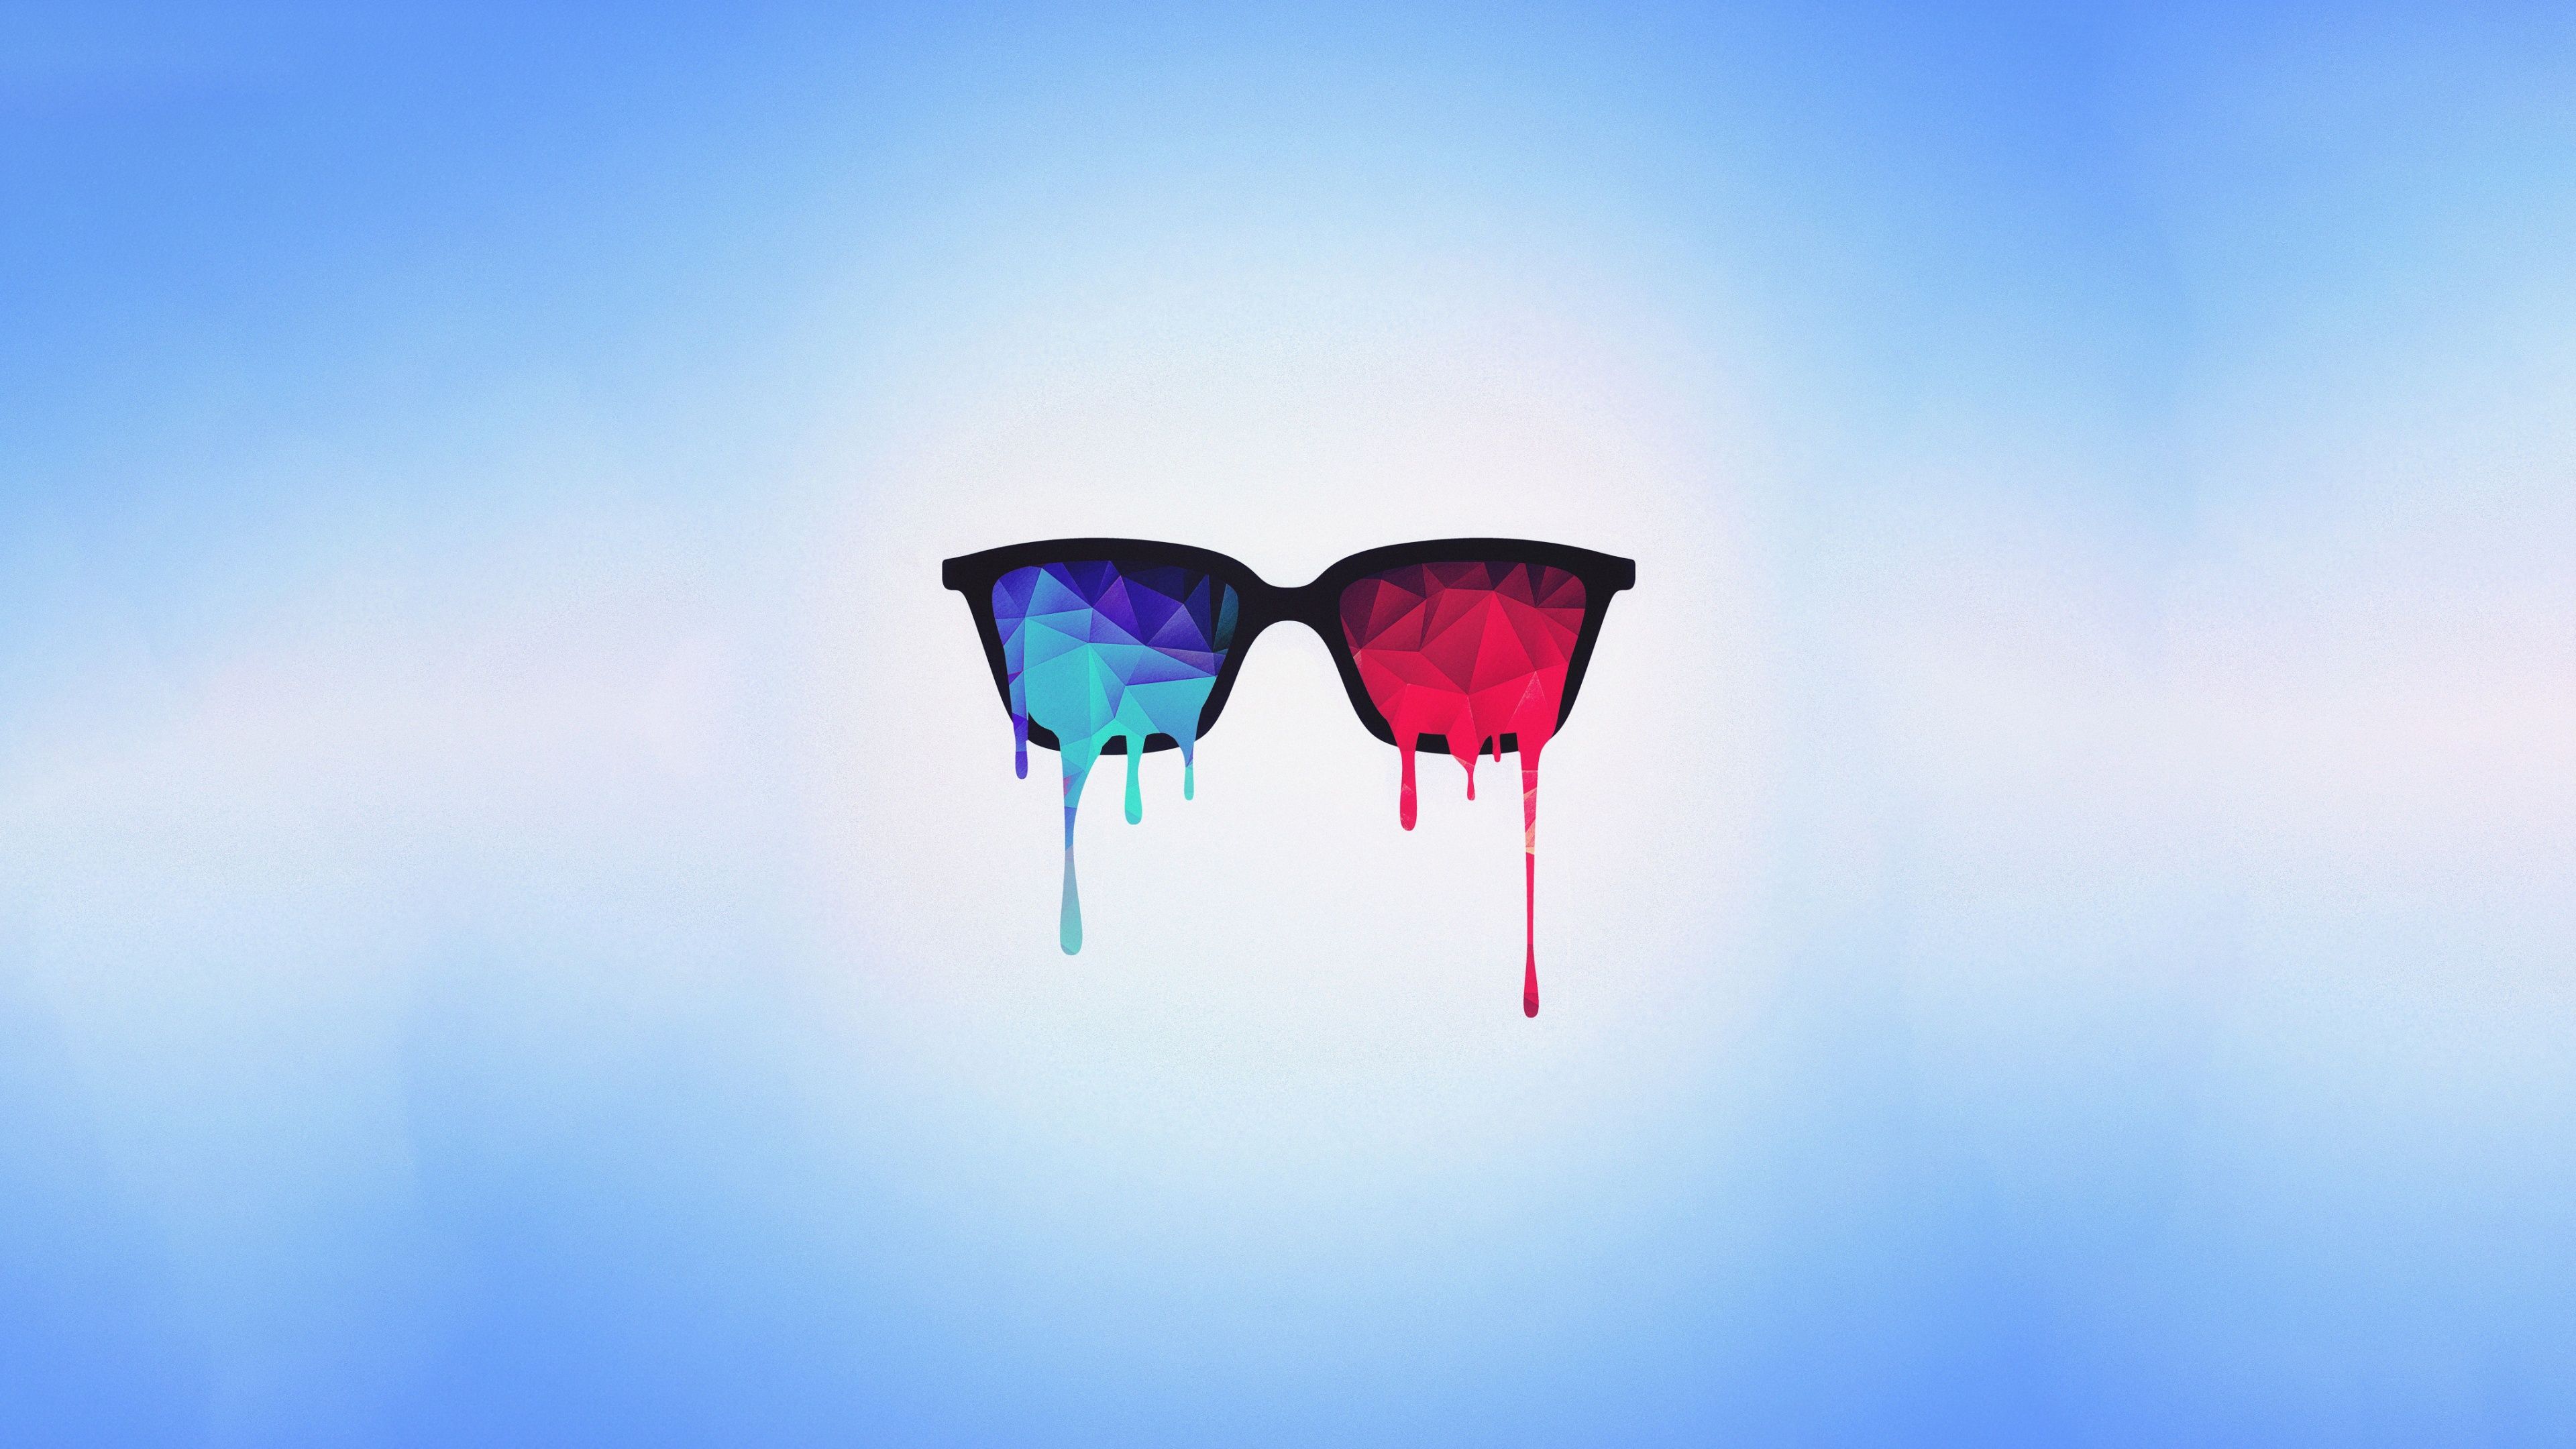 Cool glasses Wallpaper 4K, Drippy Sunglasses, 3D Psychedelic